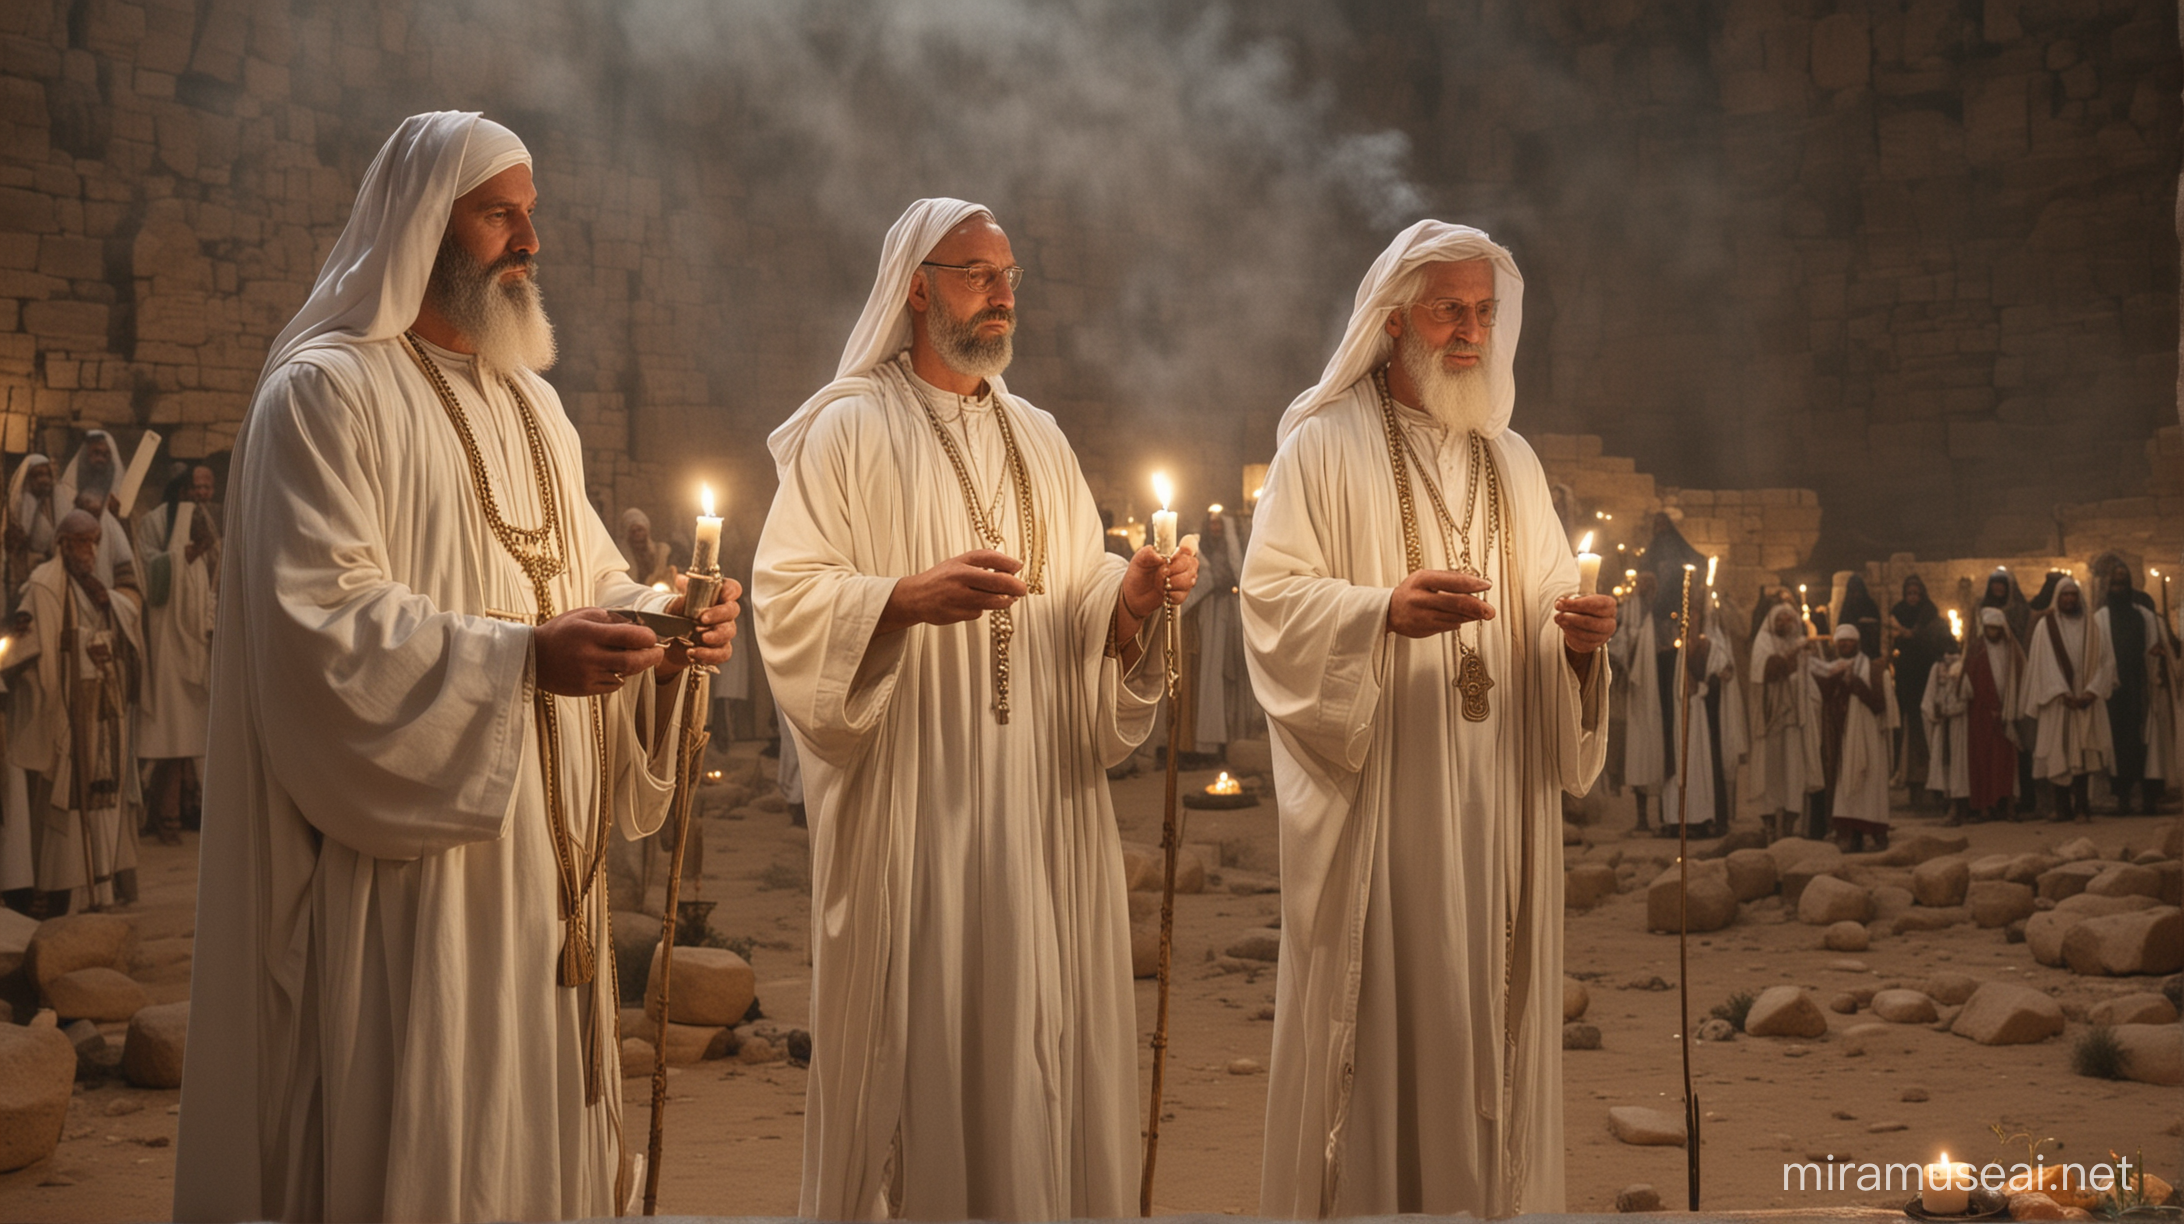 Levitical priests lighting candles in moses era